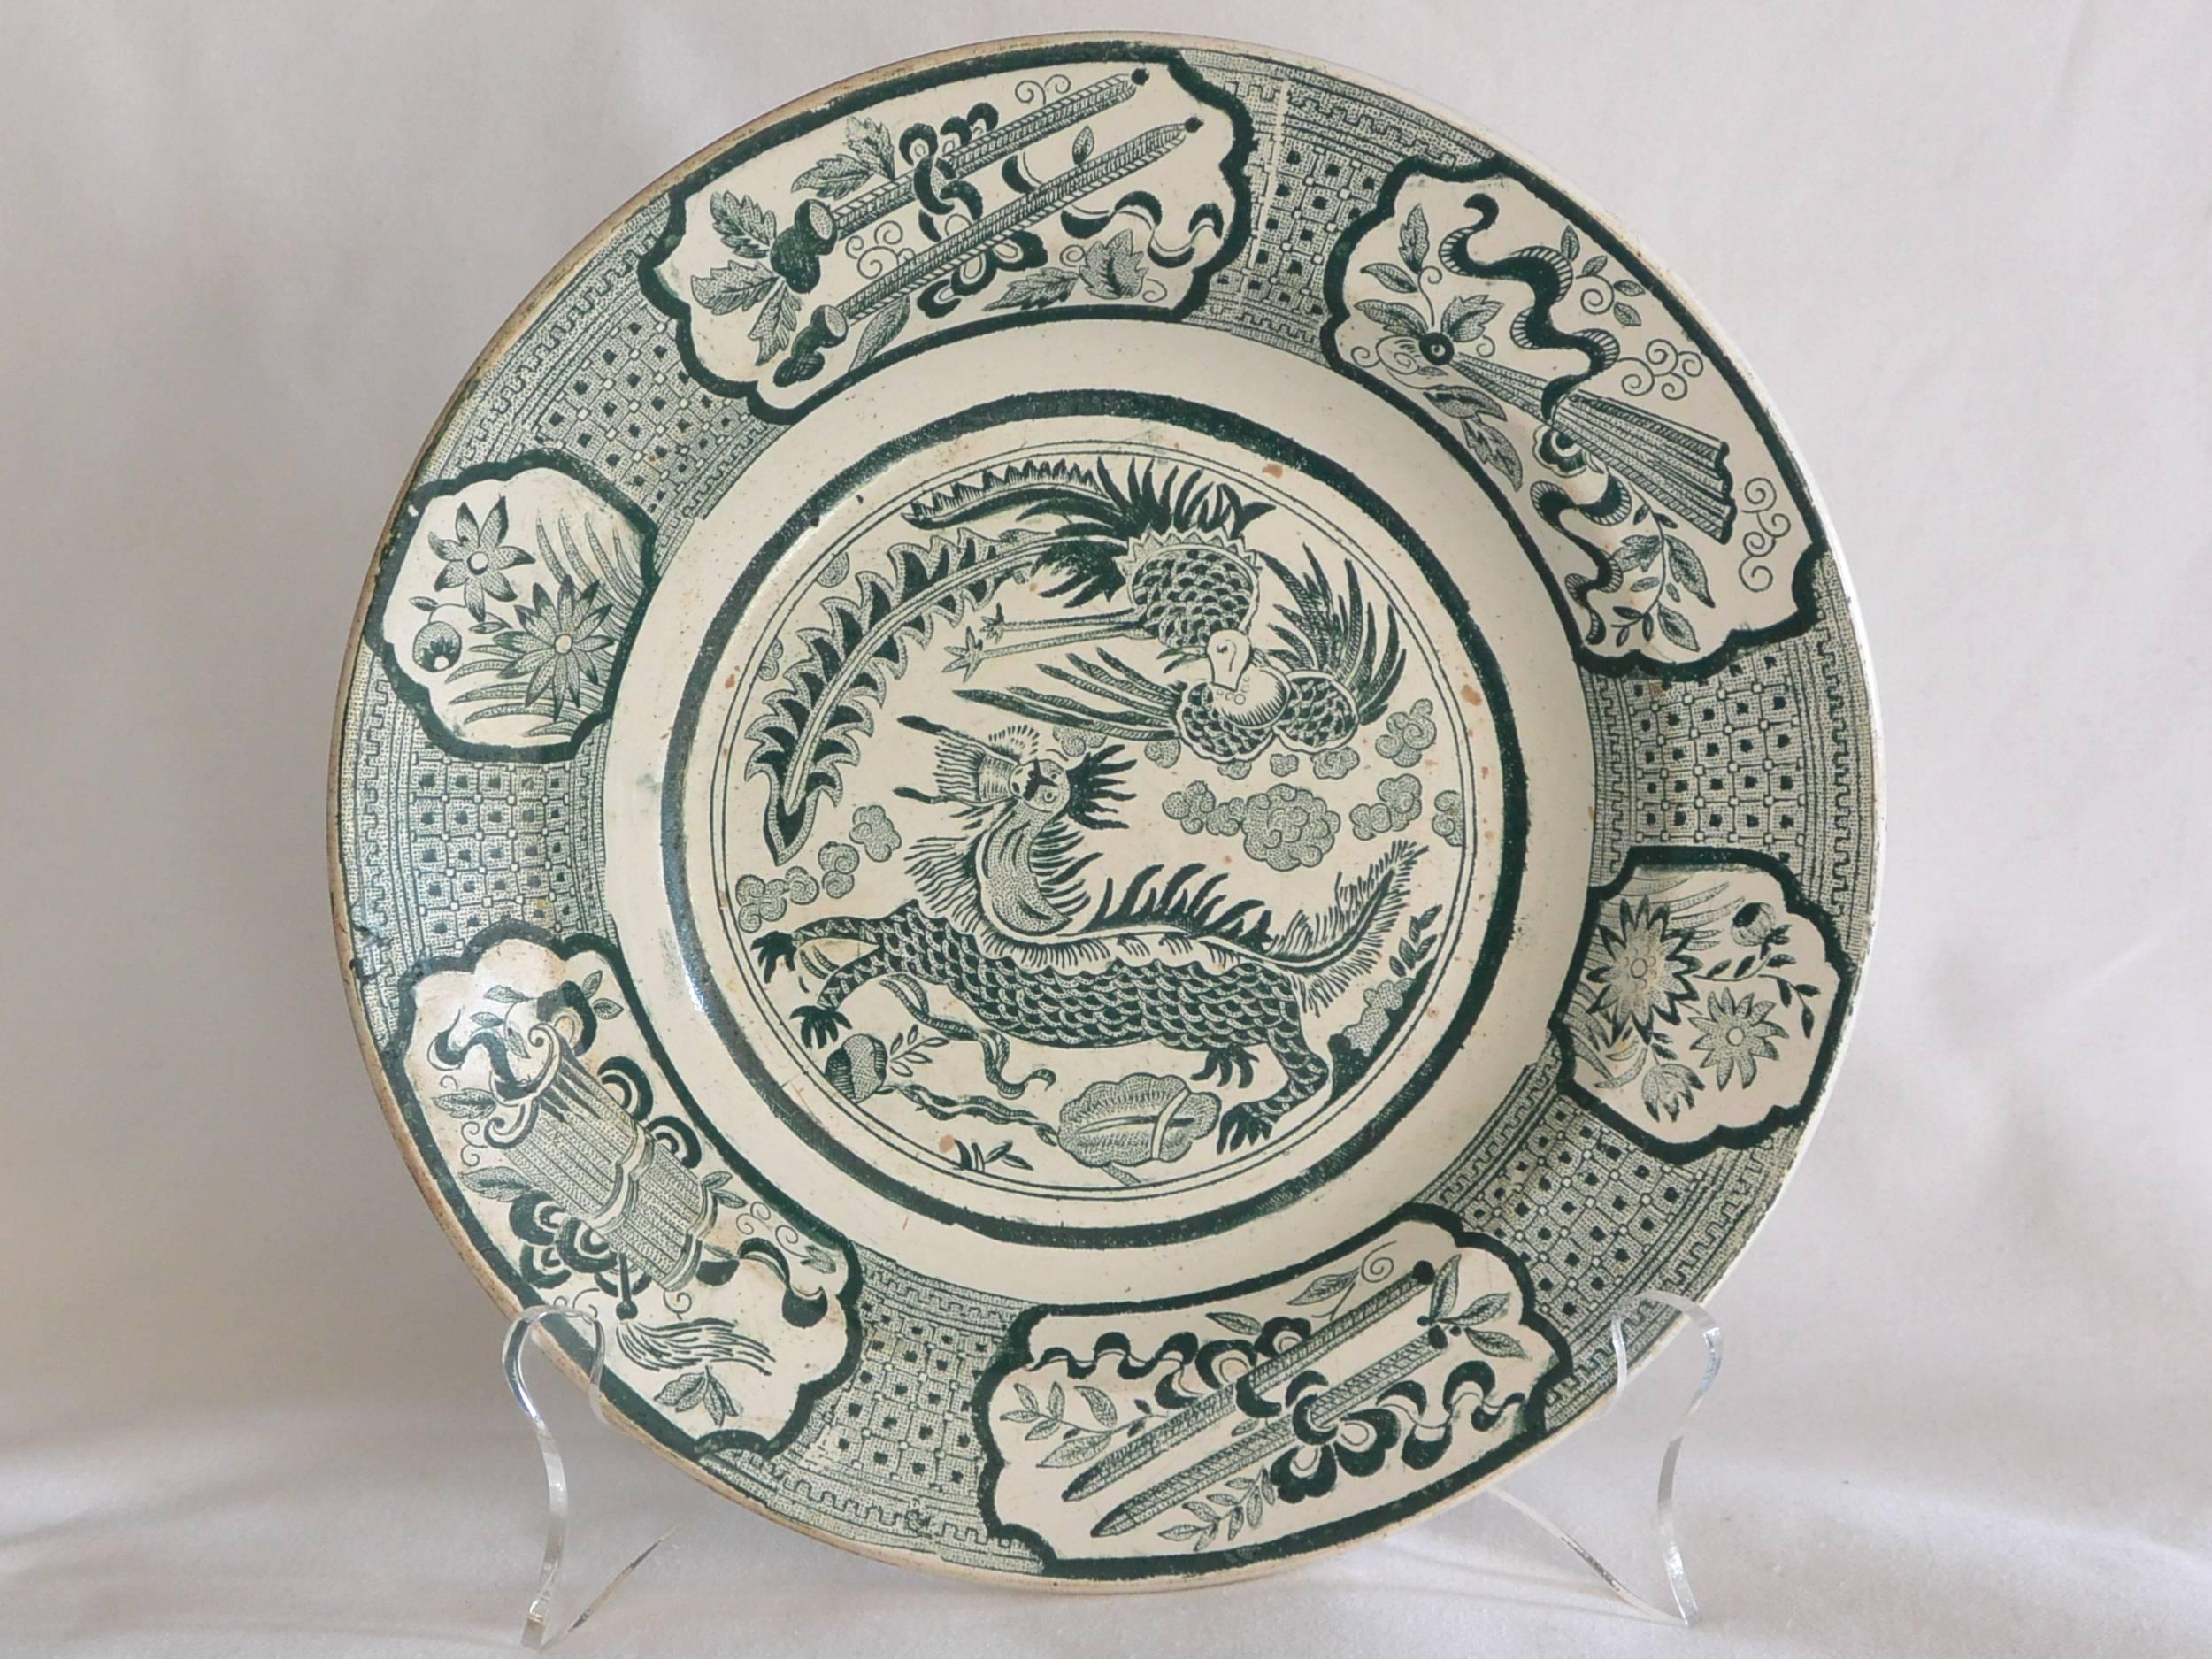 Green and white transferware chinoiserie pattern, longwy factory, France, early 20th century. 
Dimension: 9" diameter x 1.5" D.